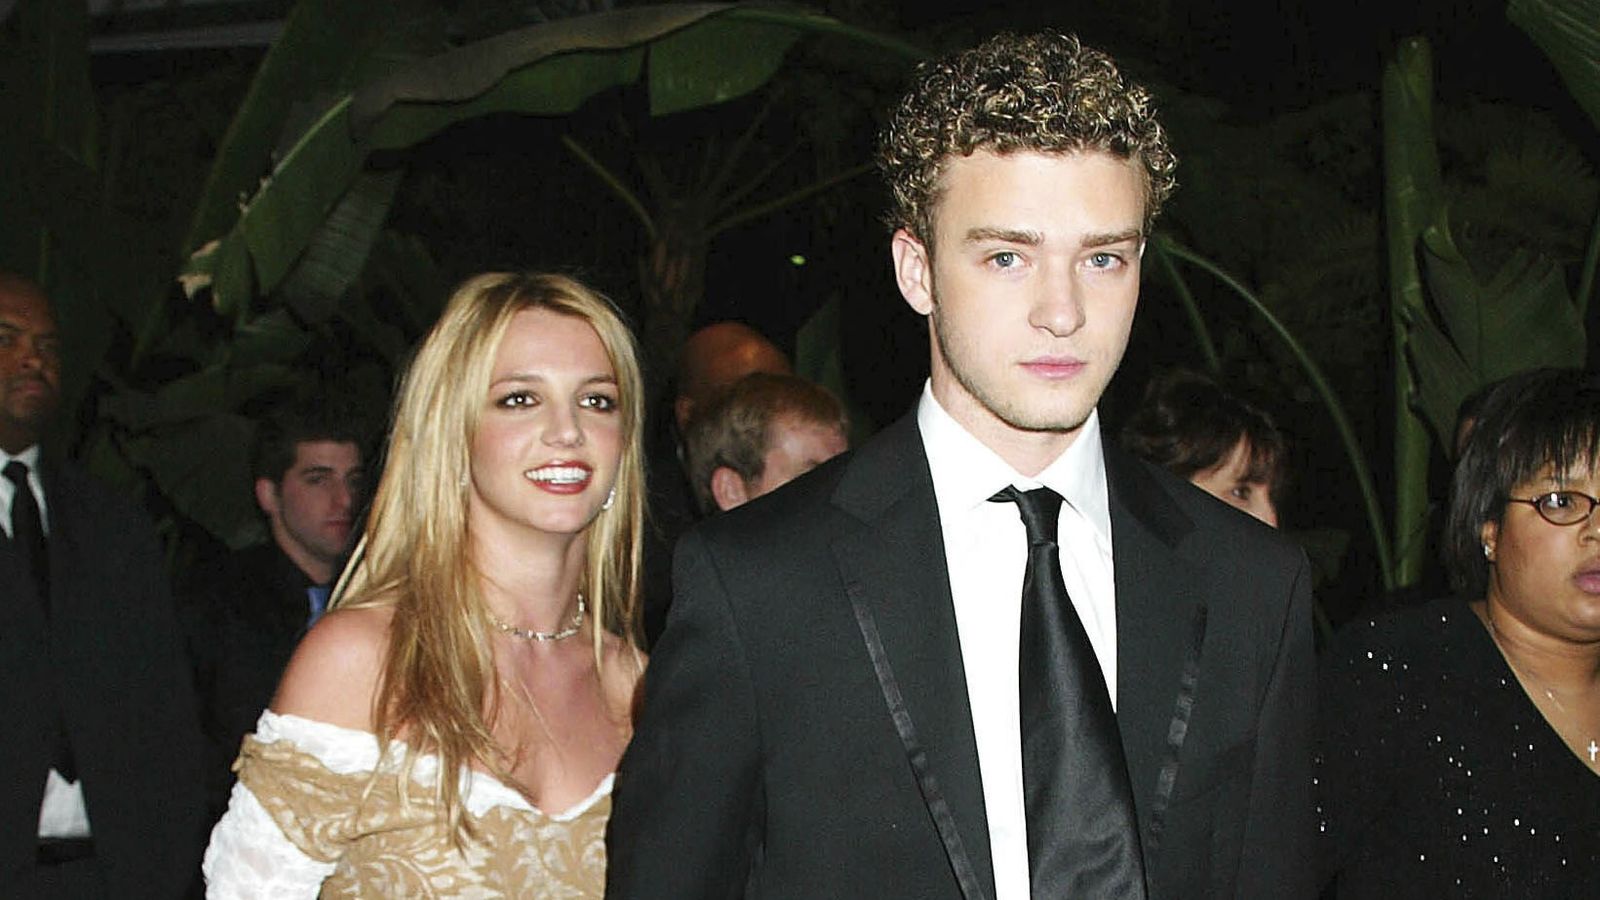 Britney Spears deletes apology to Justin Timberlake after his comments during concert